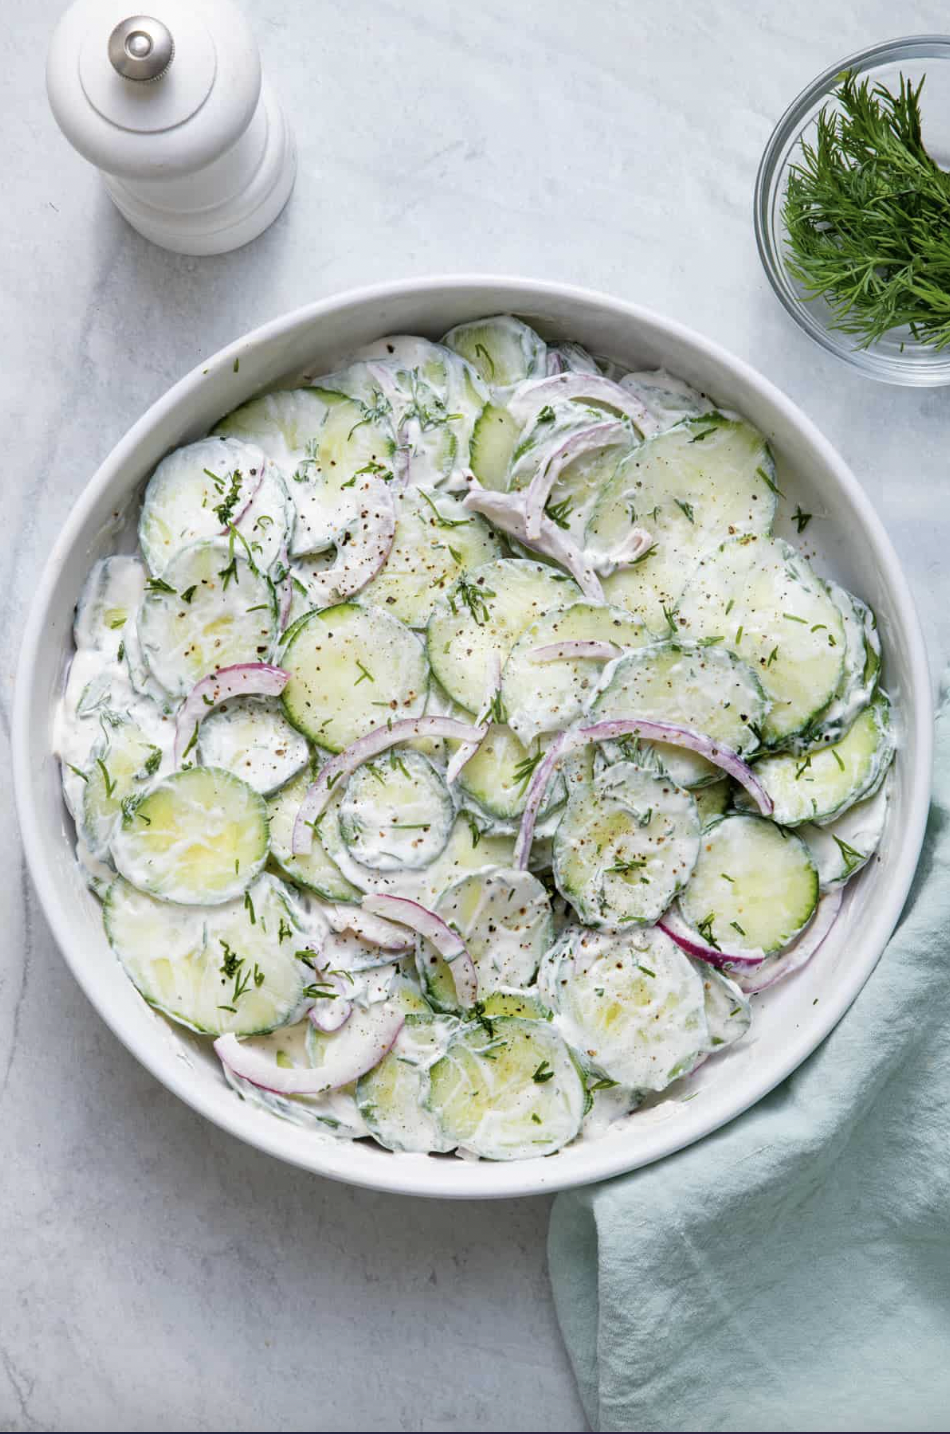 This flavorful 5-minute salad made with sour cream, red onion, and dill is delicious on its own or on top of toast. (via <a href="https://feelgoodfoodie.net/recipe/creamy-cucumber-salad/"><strong>Feel Good Foodie</strong></a>)